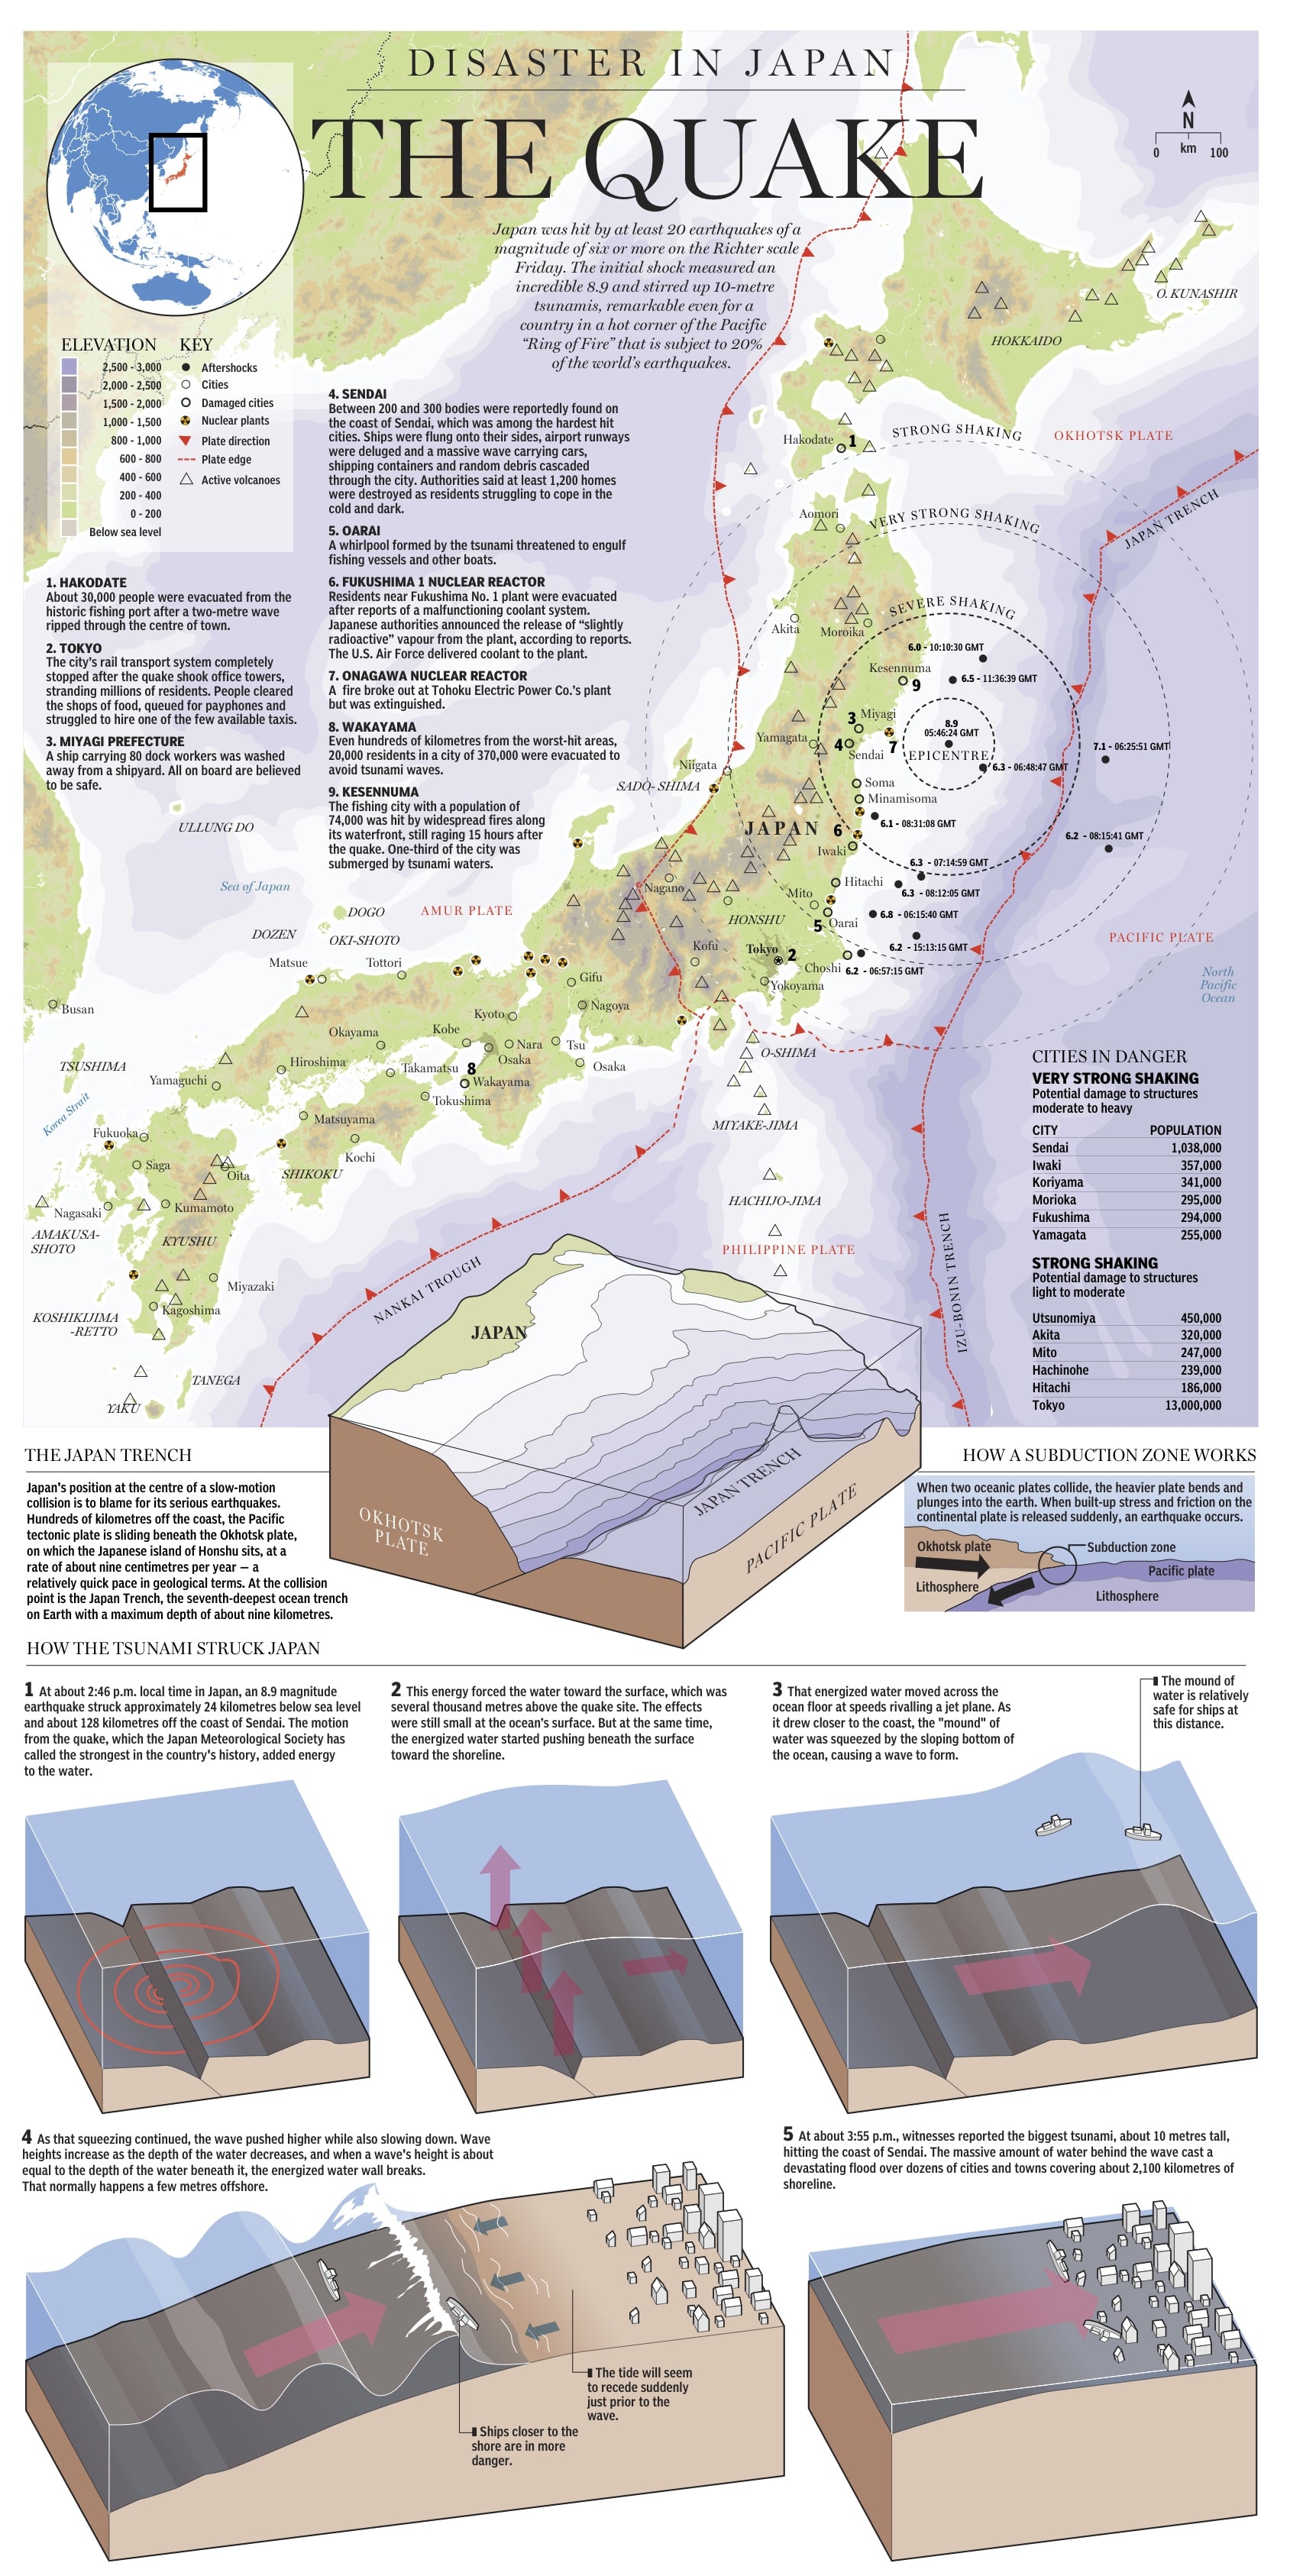 Infographic Concerning The Japan Earthquake